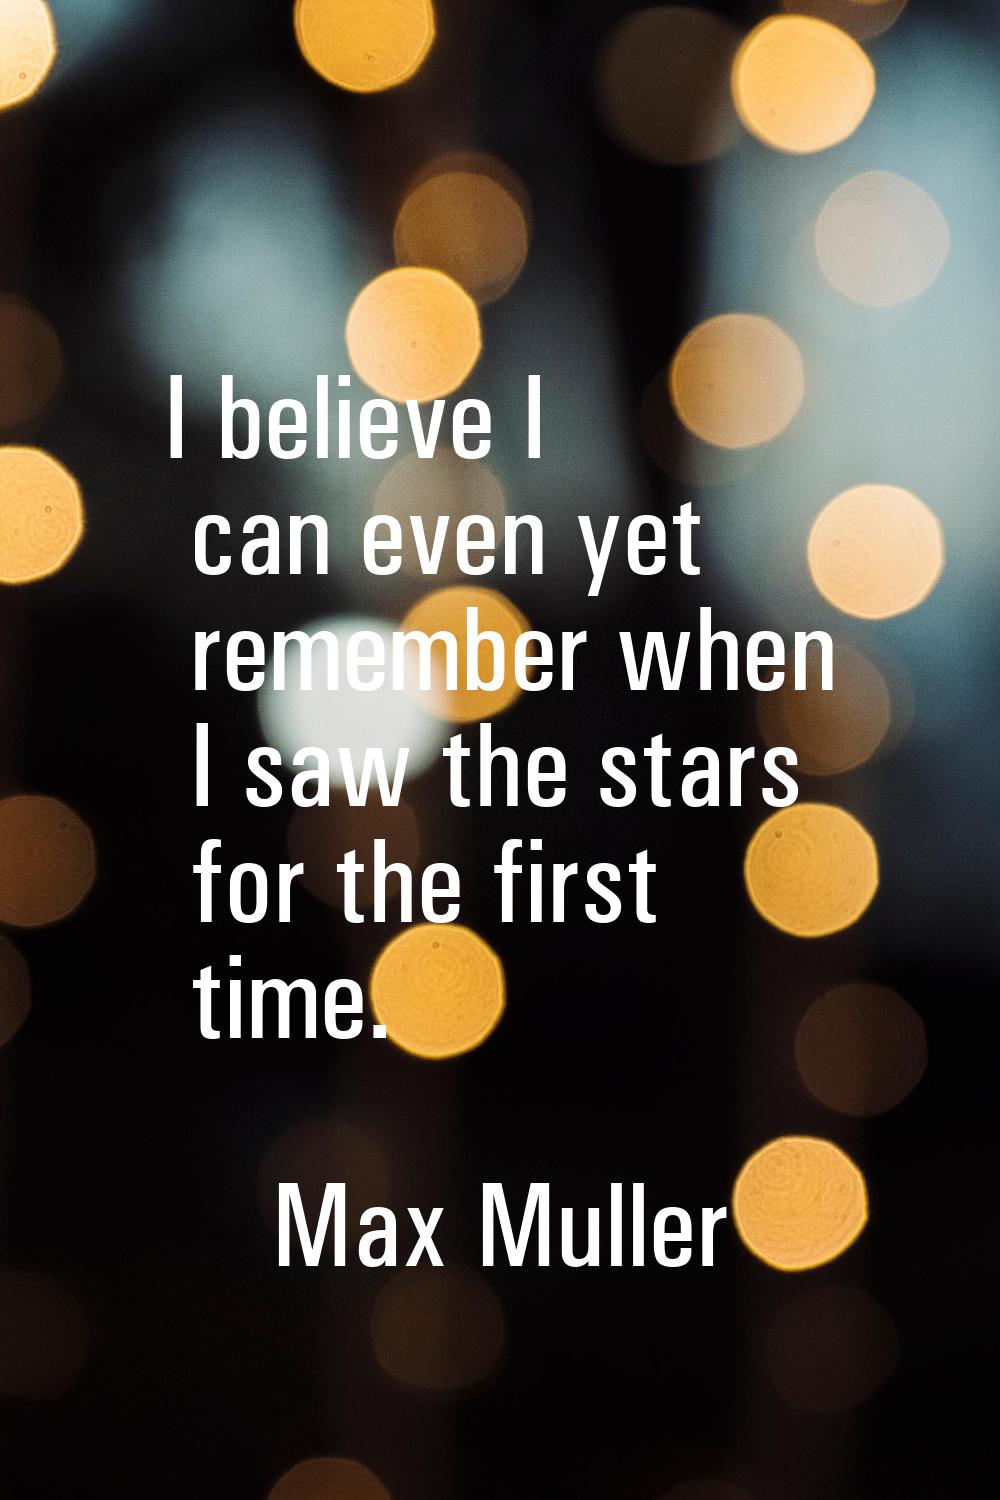 I believe I can even yet remember when I saw the stars for the first time.